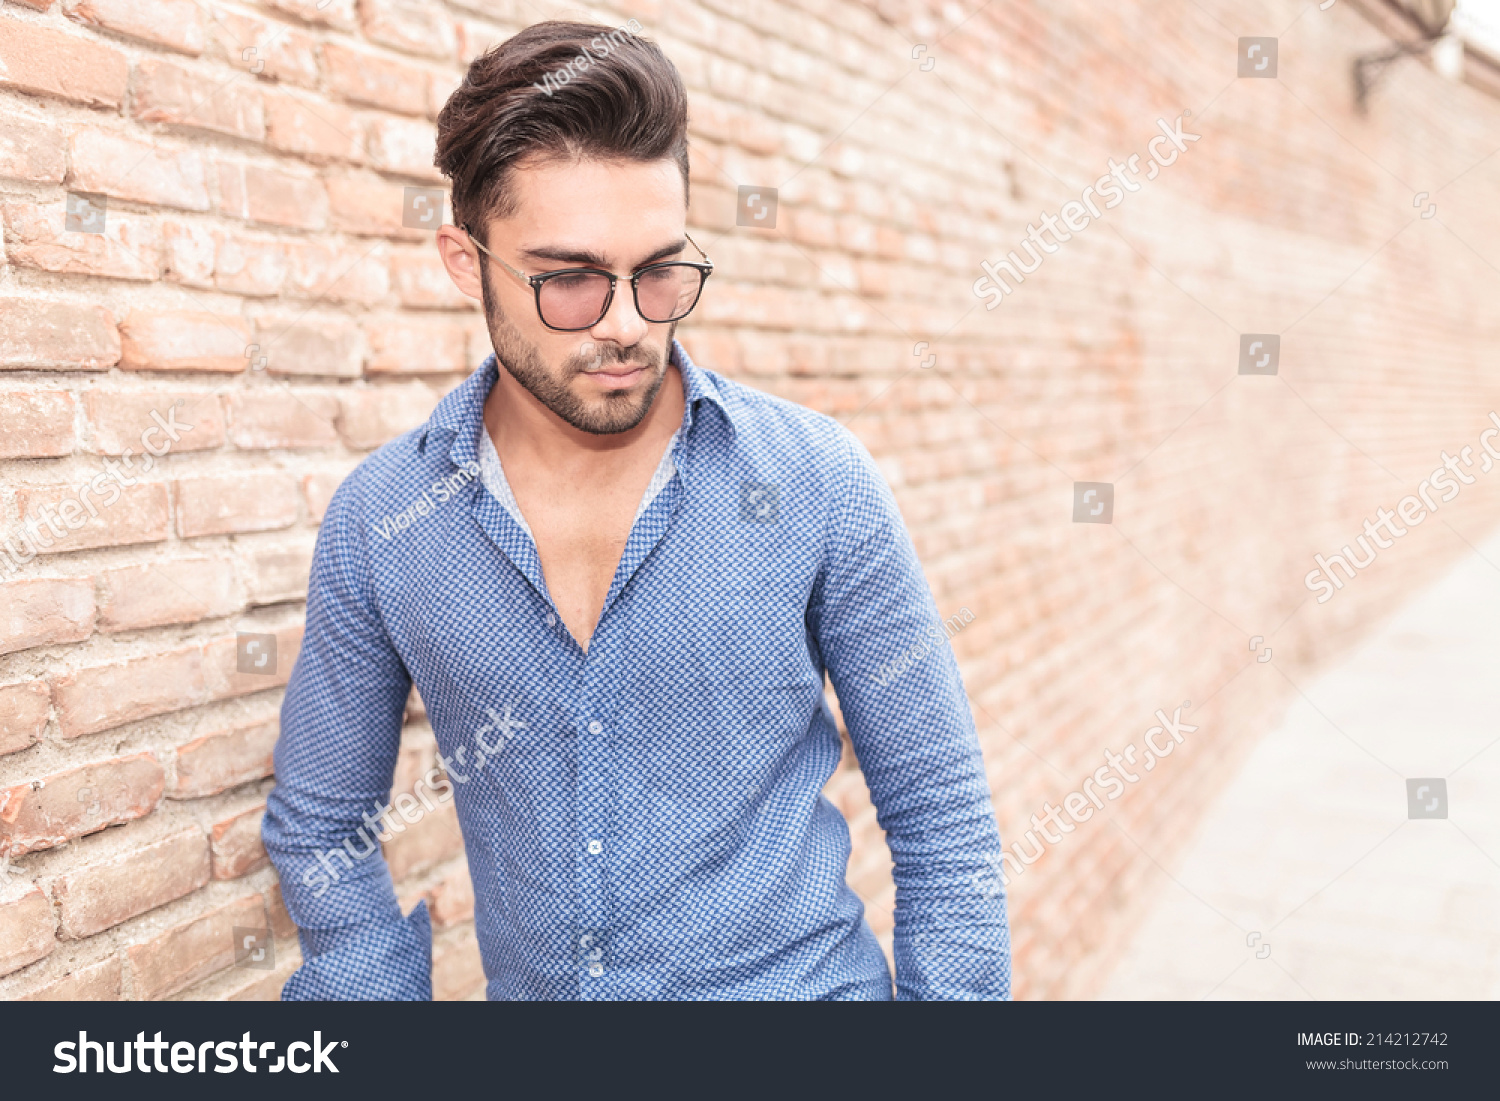 Young Casual Man With Glasses Looks Down While Standing Near Brick Wall ...